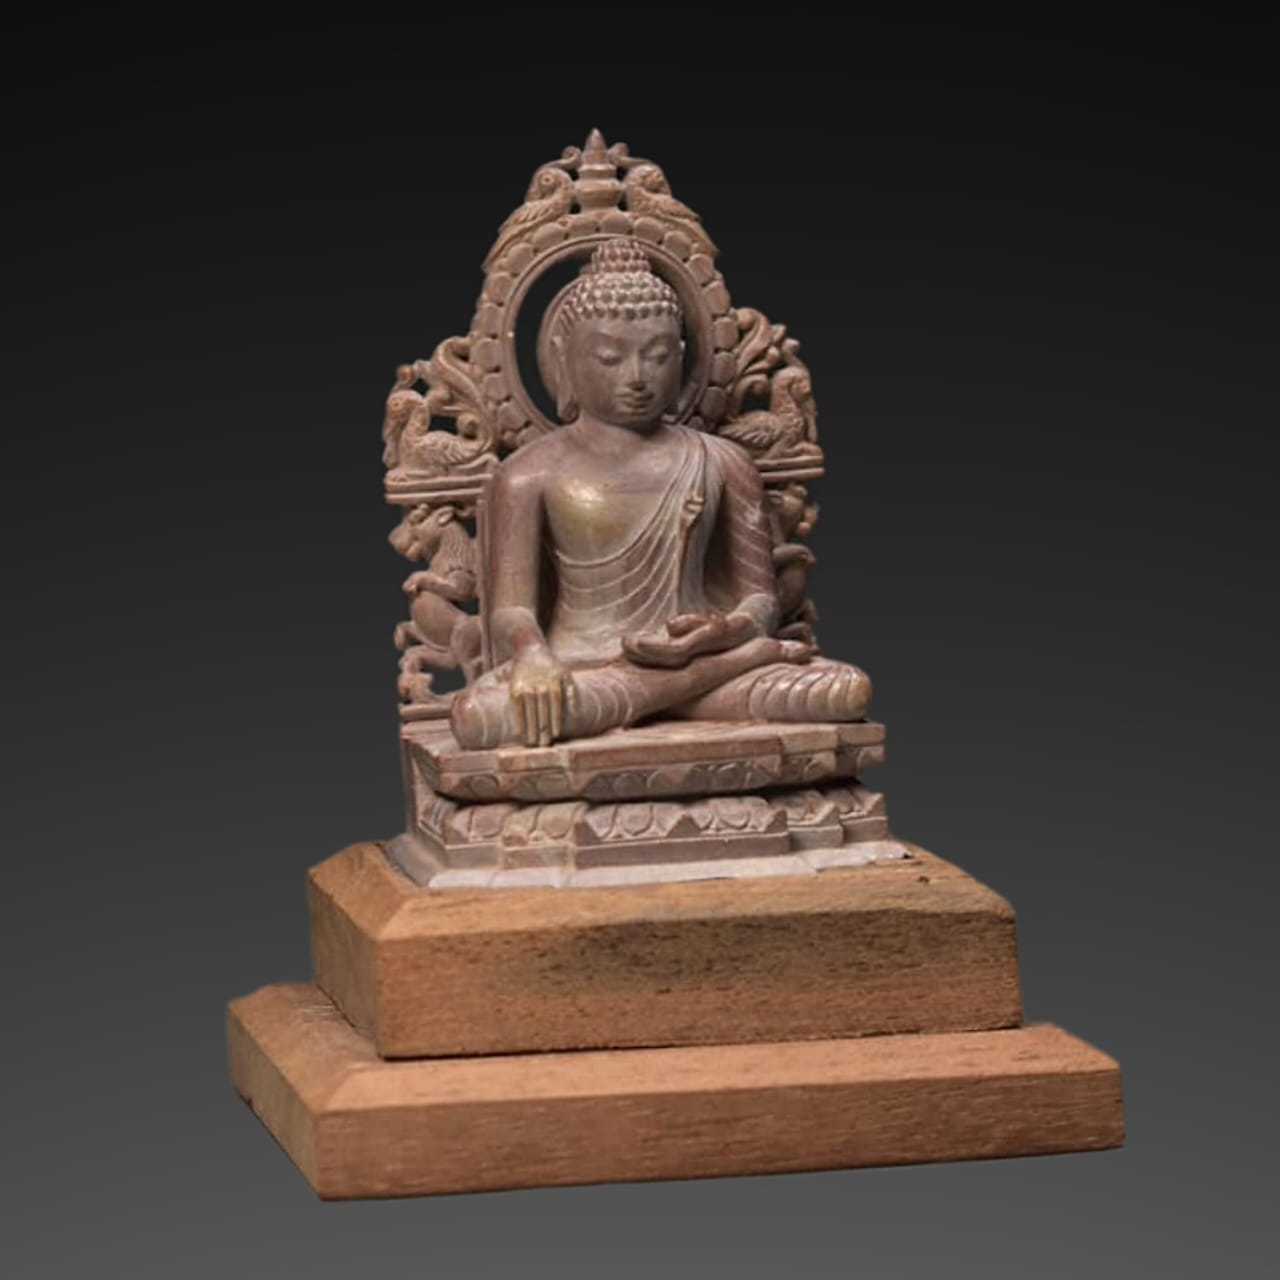 4" Inches Stone Buddha, Finely Carved, Stone Sculpture, Miniature Sculpture, Stone art - KhatiJi